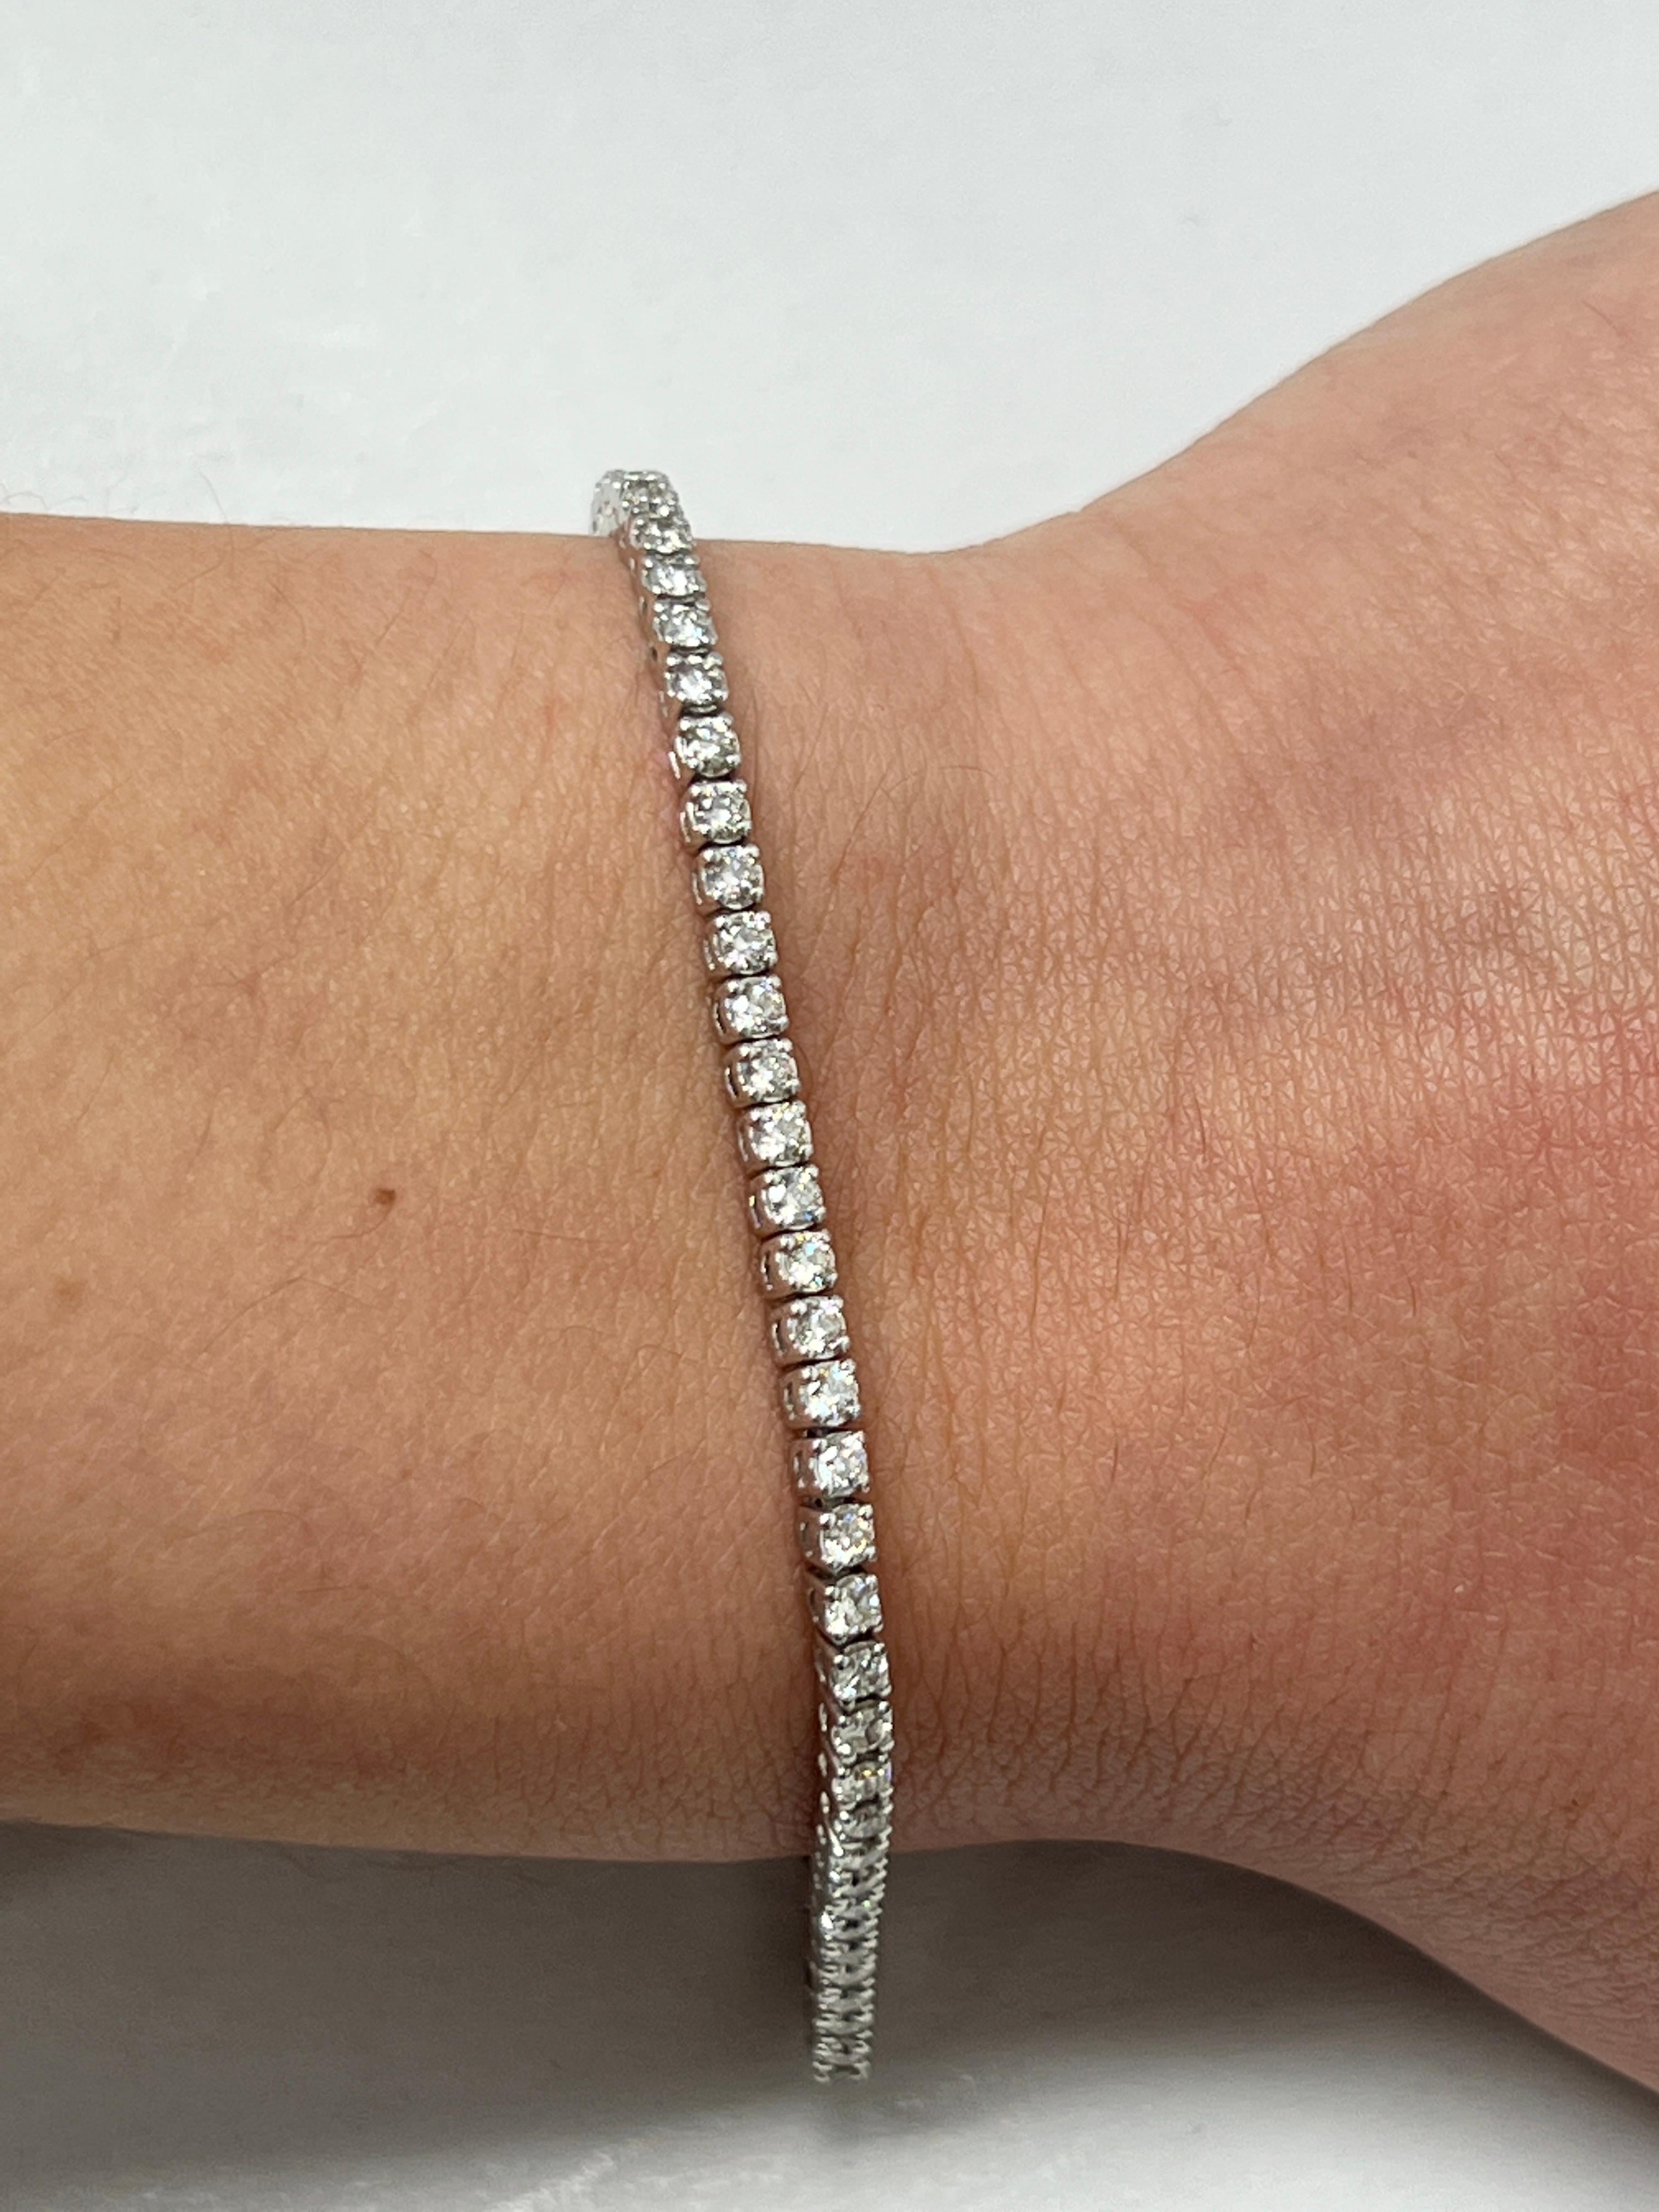 Fashion and glam are at the forefront with this exquisite diamond bracelet. This 14-karat white gold diamond bracelet is made from 8 grams of gold. The top is adorned with one row of I-J color, VS/SI clarity diamonds. This bracelet carries 77 round